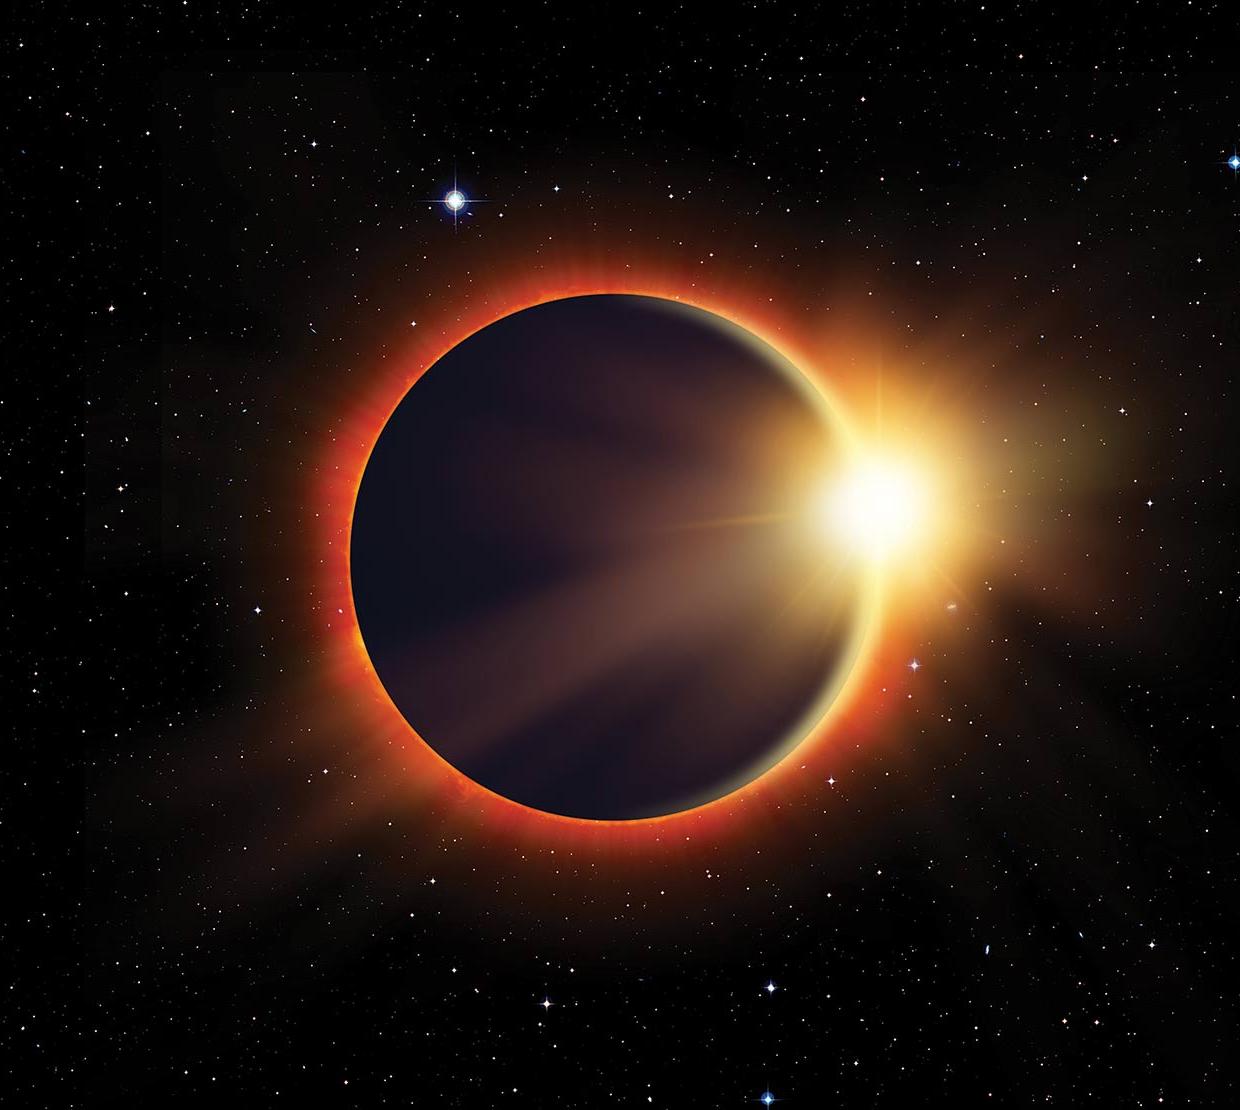 moon covering sun in a solar eclipse